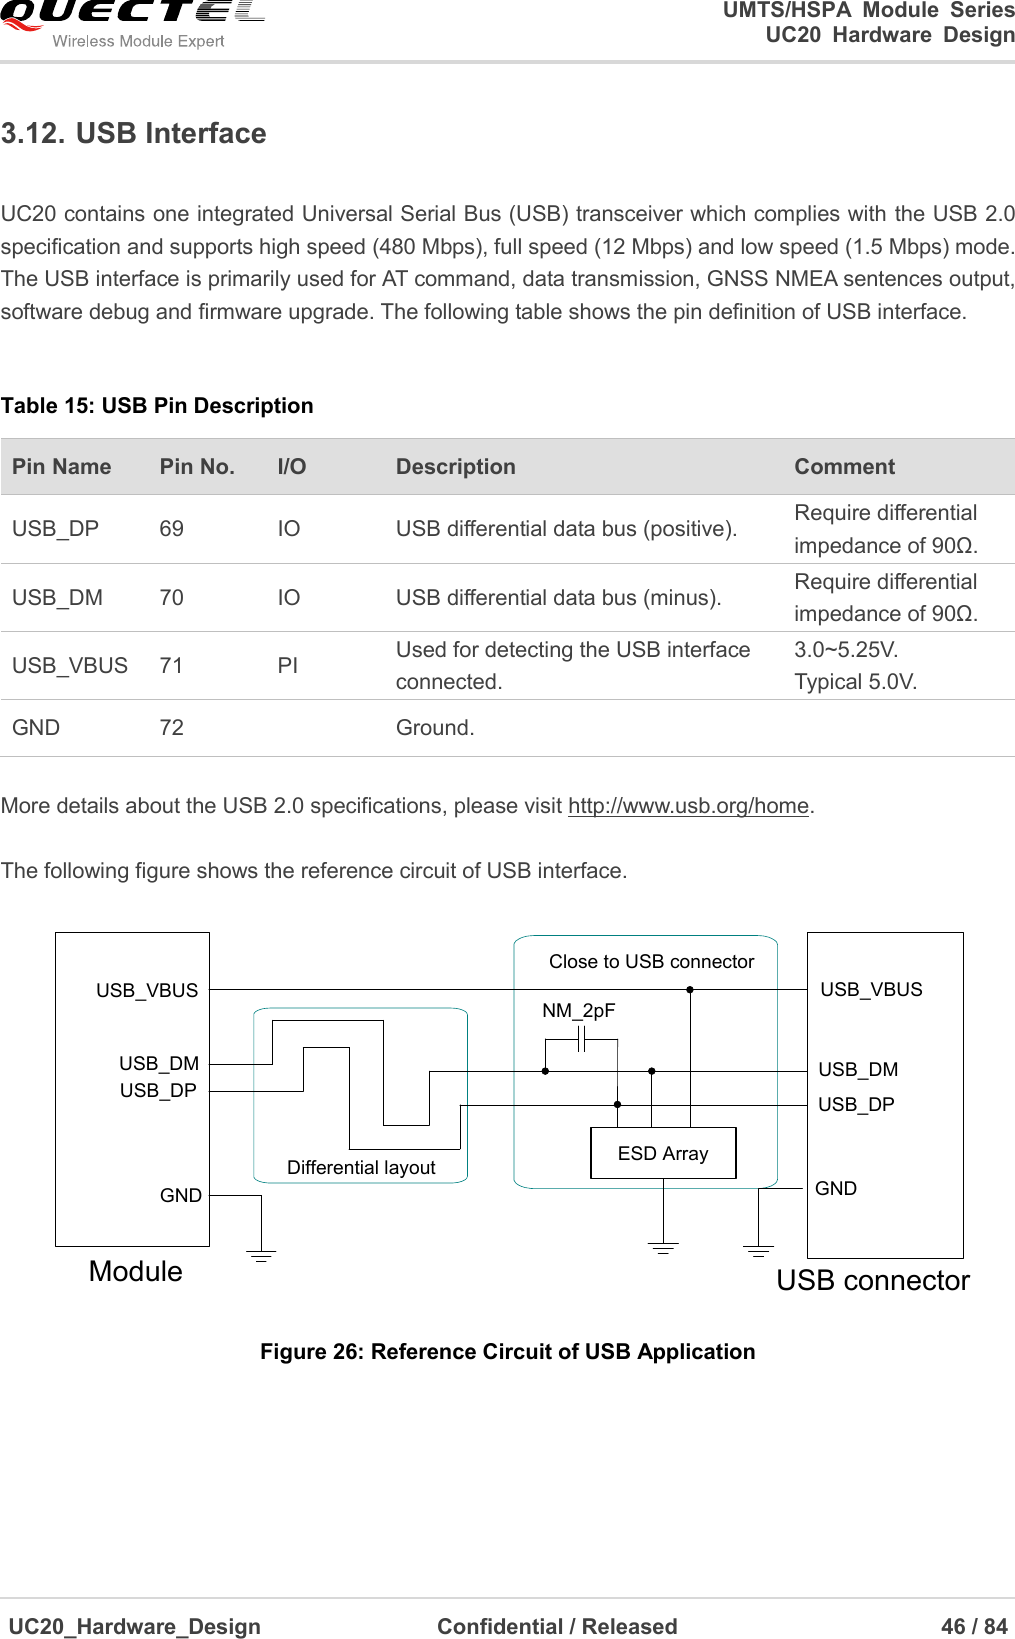                                                                                                                                               UMTS/HSPA  Module  Series                                                                 UC20  Hardware  Design  UC20_Hardware_Design                  Confidential / Released                            46 / 84     3.12. USB Interface  UC20 contains one integrated Universal Serial Bus (USB) transceiver which complies with the USB 2.0 specification and supports high speed (480 Mbps), full speed (12 Mbps) and low speed (1.5 Mbps) mode. The USB interface is primarily used for AT command, data transmission, GNSS NMEA sentences output, software debug and firmware upgrade. The following table shows the pin definition of USB interface.    Table 15: USB Pin Description Pin Name   Pin No. I/O Description   Comment USB_DP 69 IO USB differential data bus (positive). Require differential impedance of 90Ω. USB_DM 70 IO USB differential data bus (minus). Require differential impedance of 90Ω. USB_VBUS 71 PI Used for detecting the USB interface connected. 3.0~5.25V. Typical 5.0V. GND 72  Ground.   More details about the USB 2.0 specifications, please visit http://www.usb.org/home.  The following figure shows the reference circuit of USB interface. ModuleUSB_VBUSUSB_DPUSB_DMGNDUSB connectorClose to USB connectorDifferential layoutUSB_VBUSUSB_DPUSB_DMGNDESD ArrayNM_2pF Figure 26: Reference Circuit of USB Application      